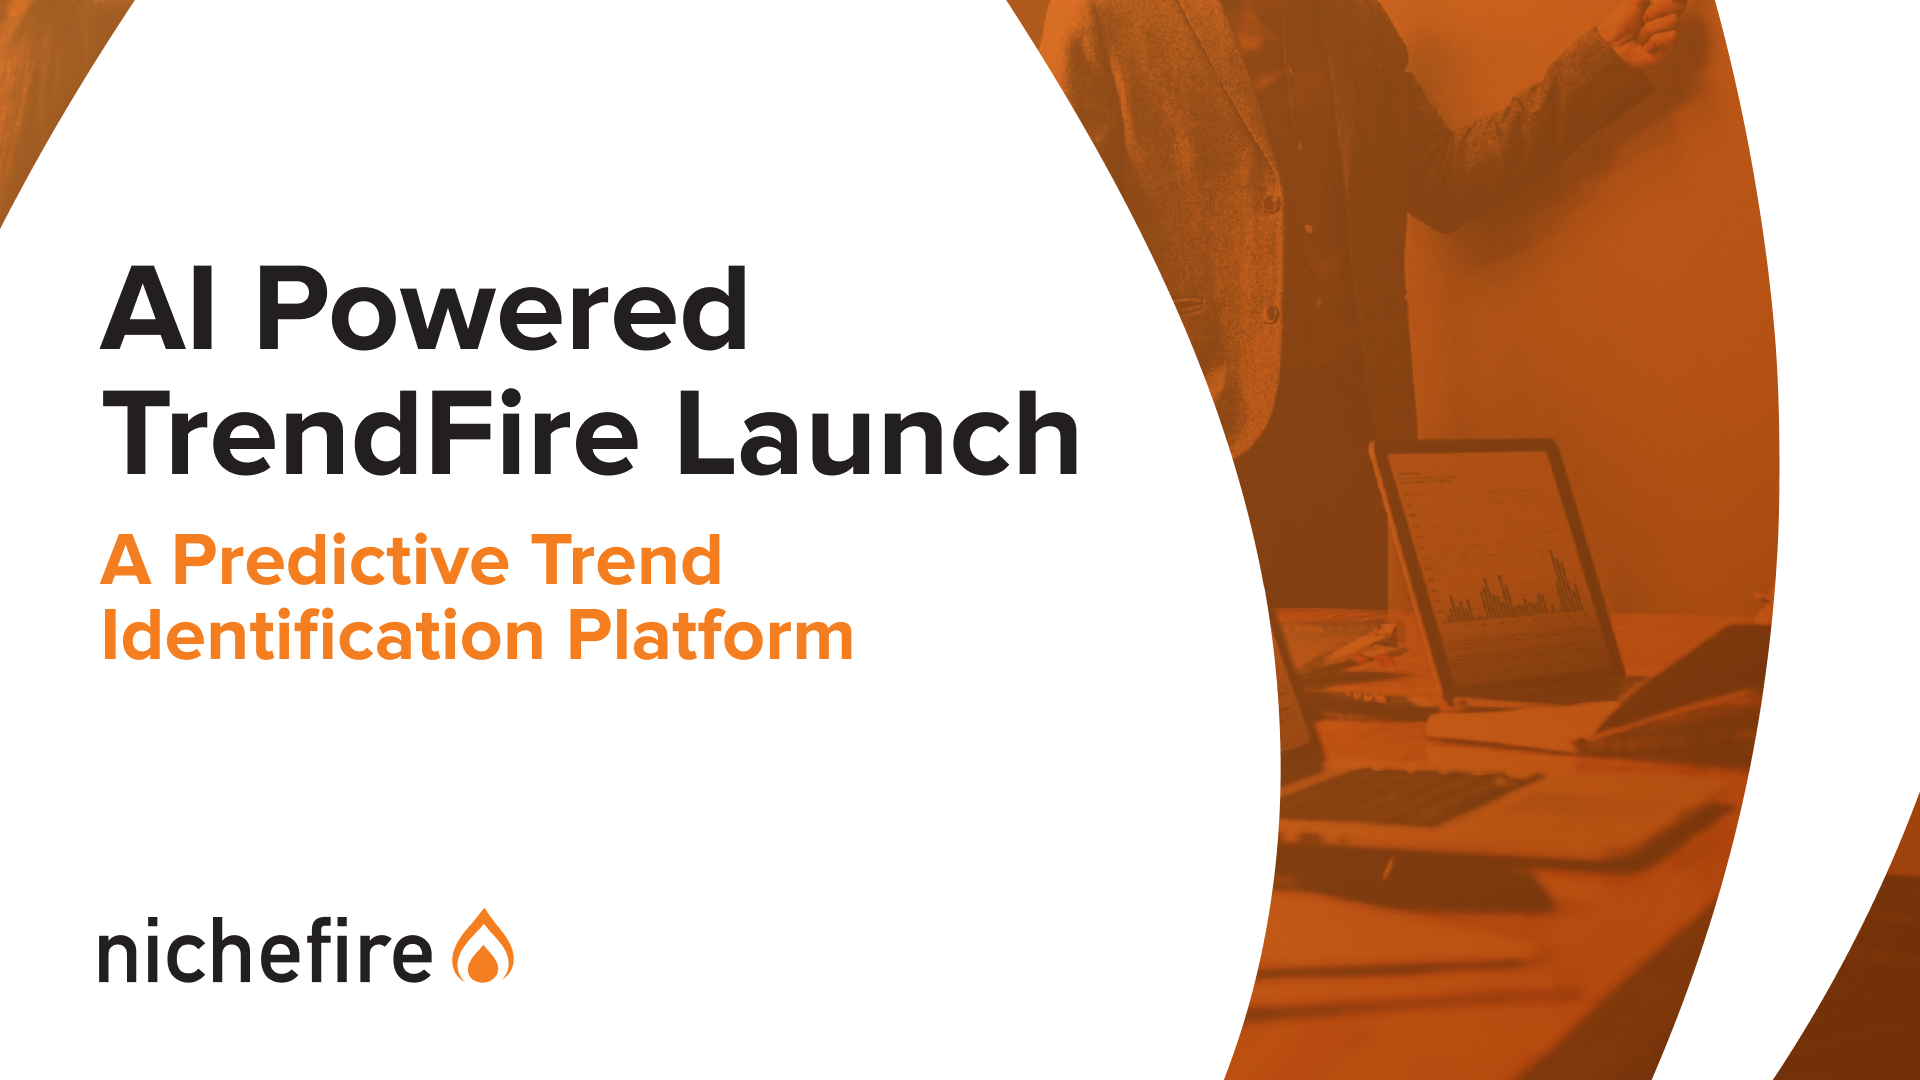 AI Powered TrendFire Launch – A Predictive Trend Identification Platform From Nichefire